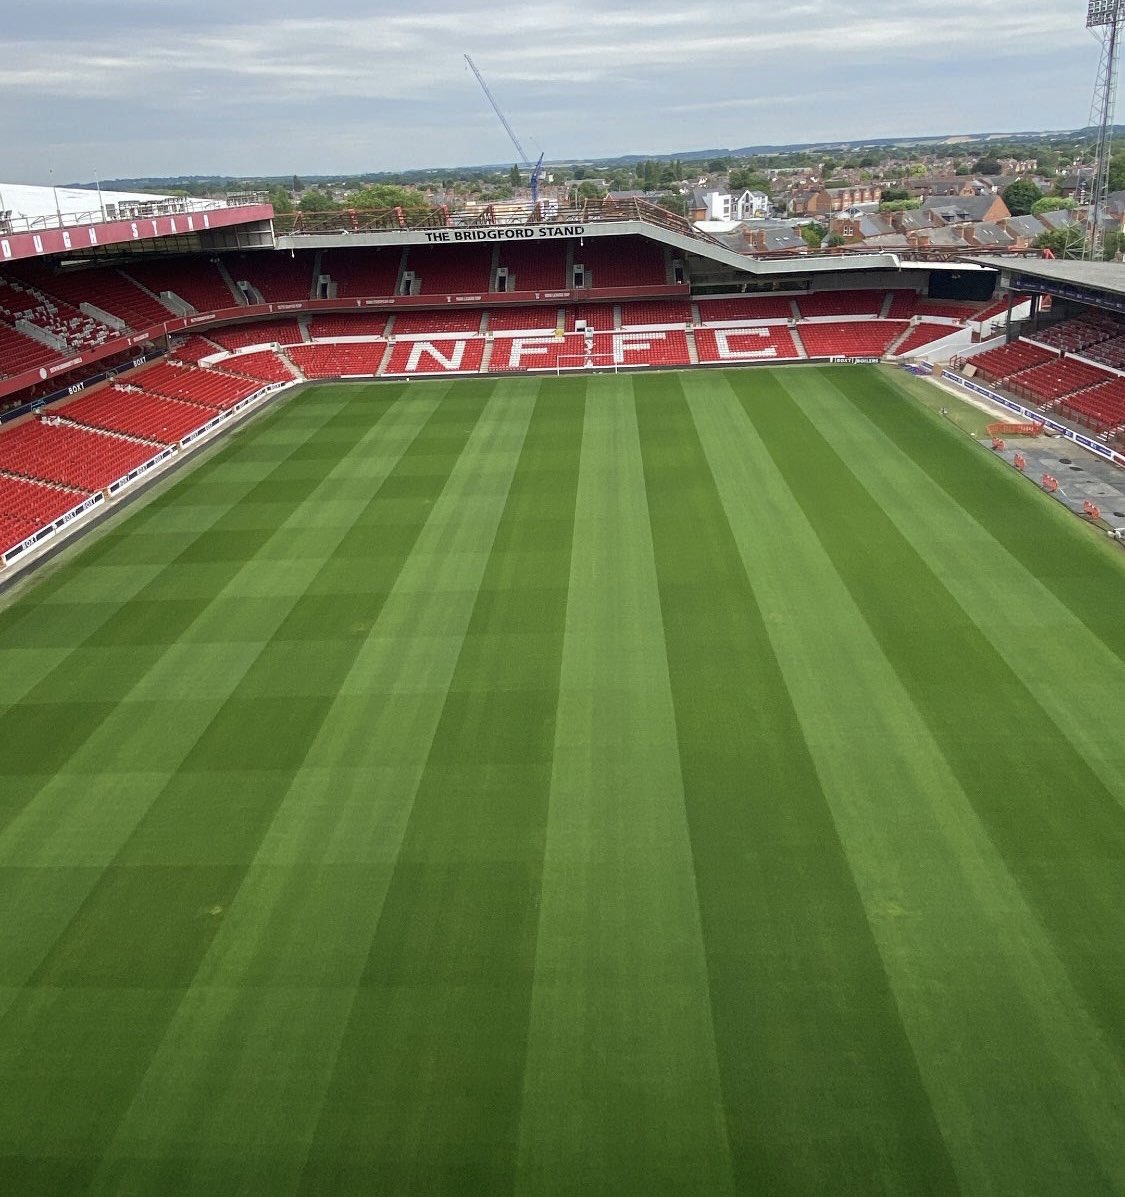 “Ayy eddehhhh” When we putting a ring in the middle of this pitch for the fans ? @EddieHearn #NFFC